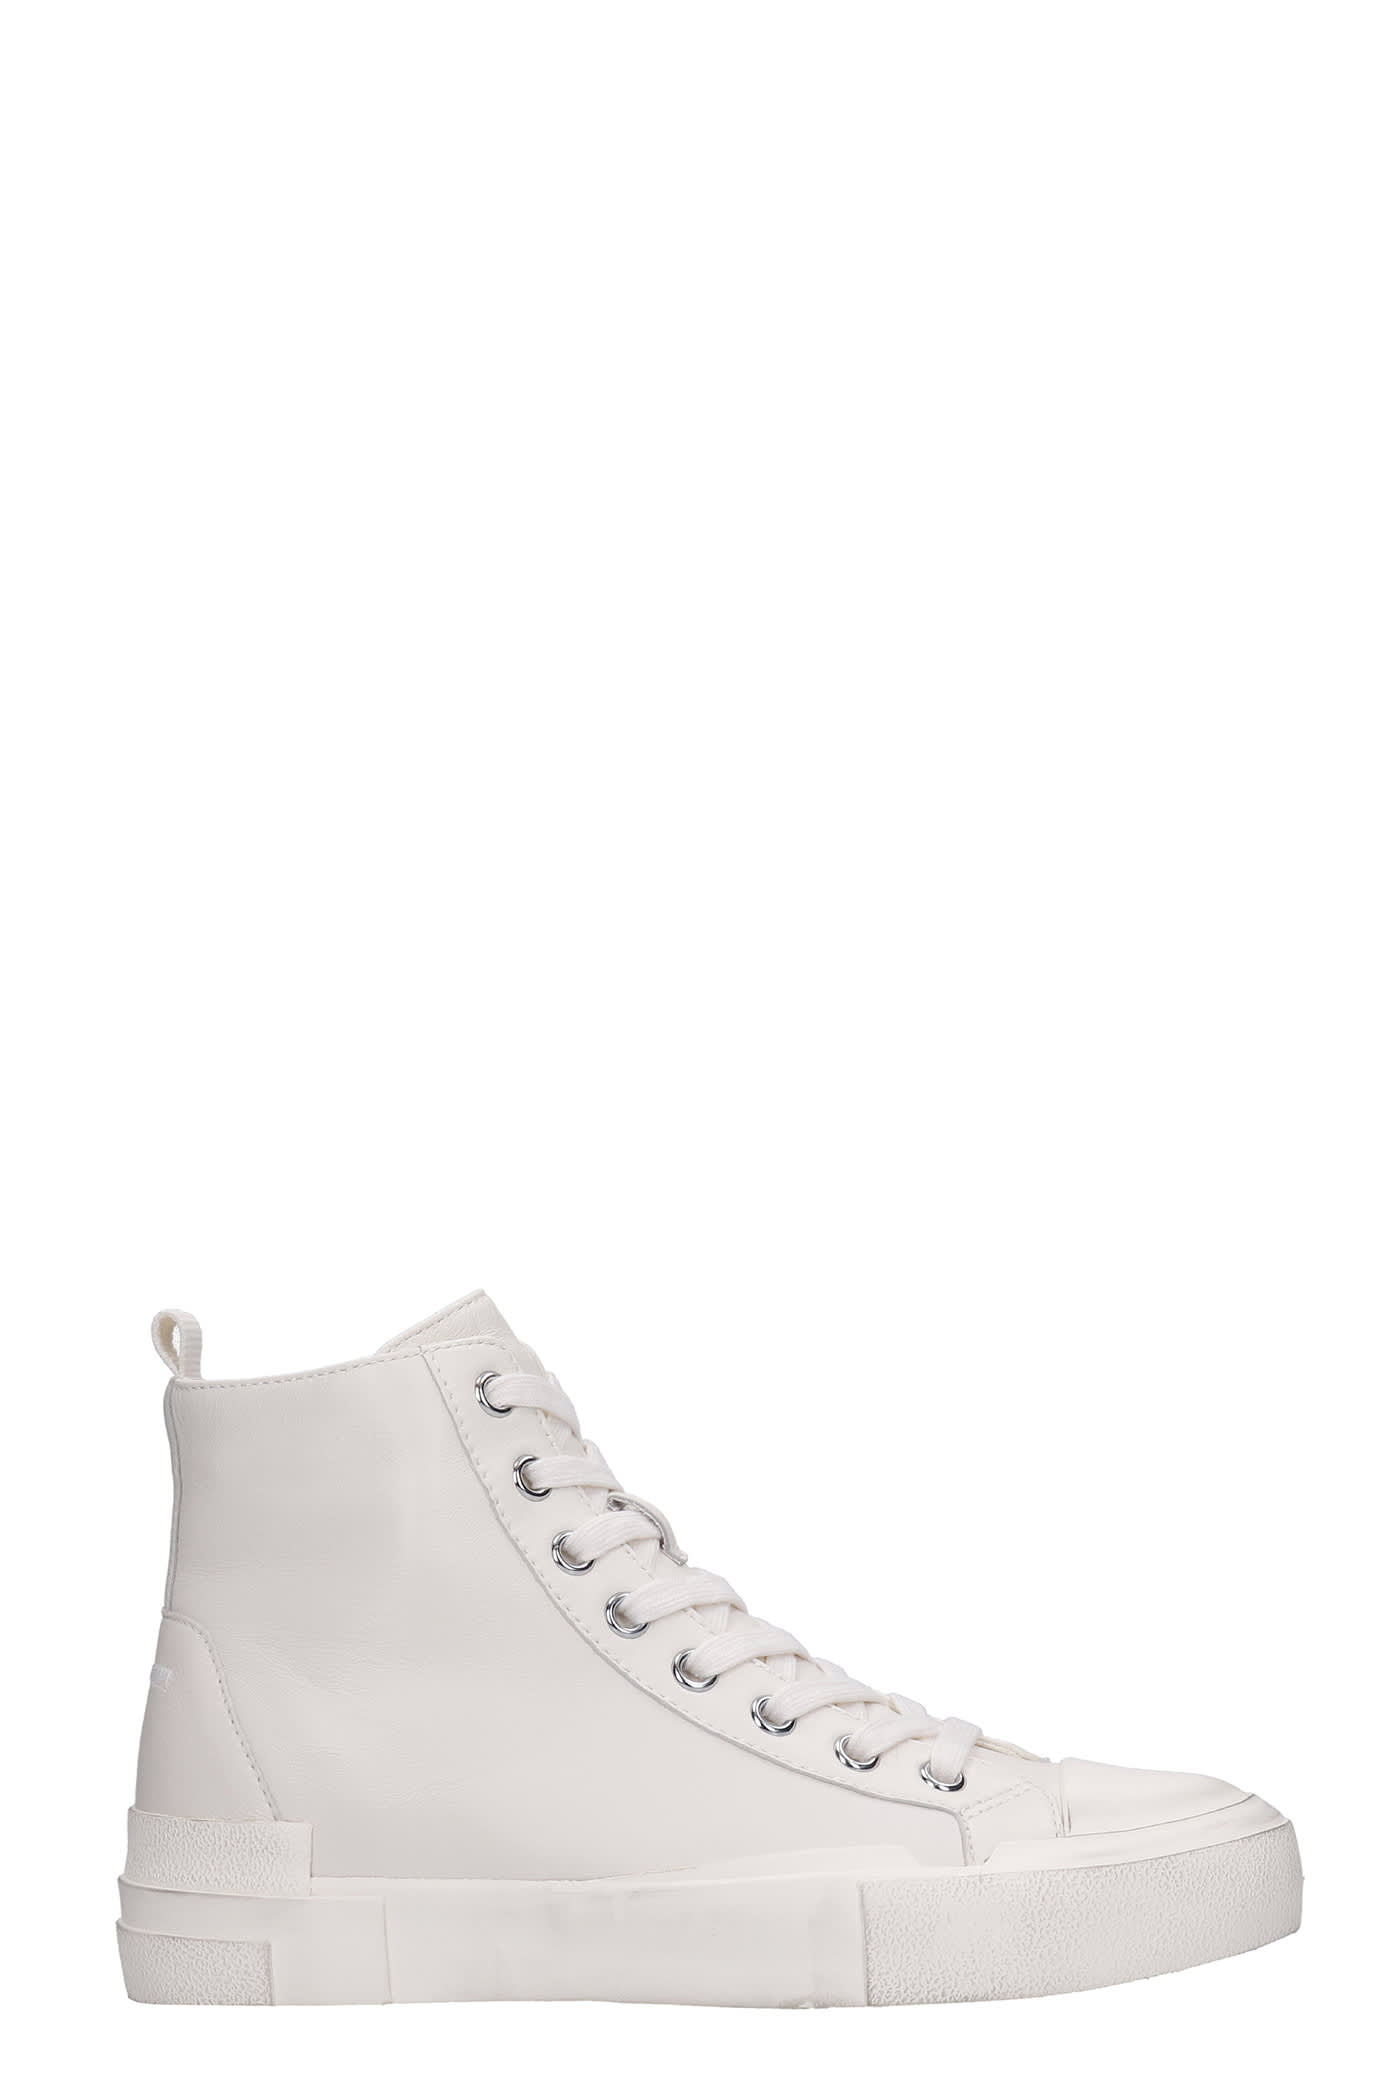 Ash Ghiblybis 03 Sneakers In White Leather